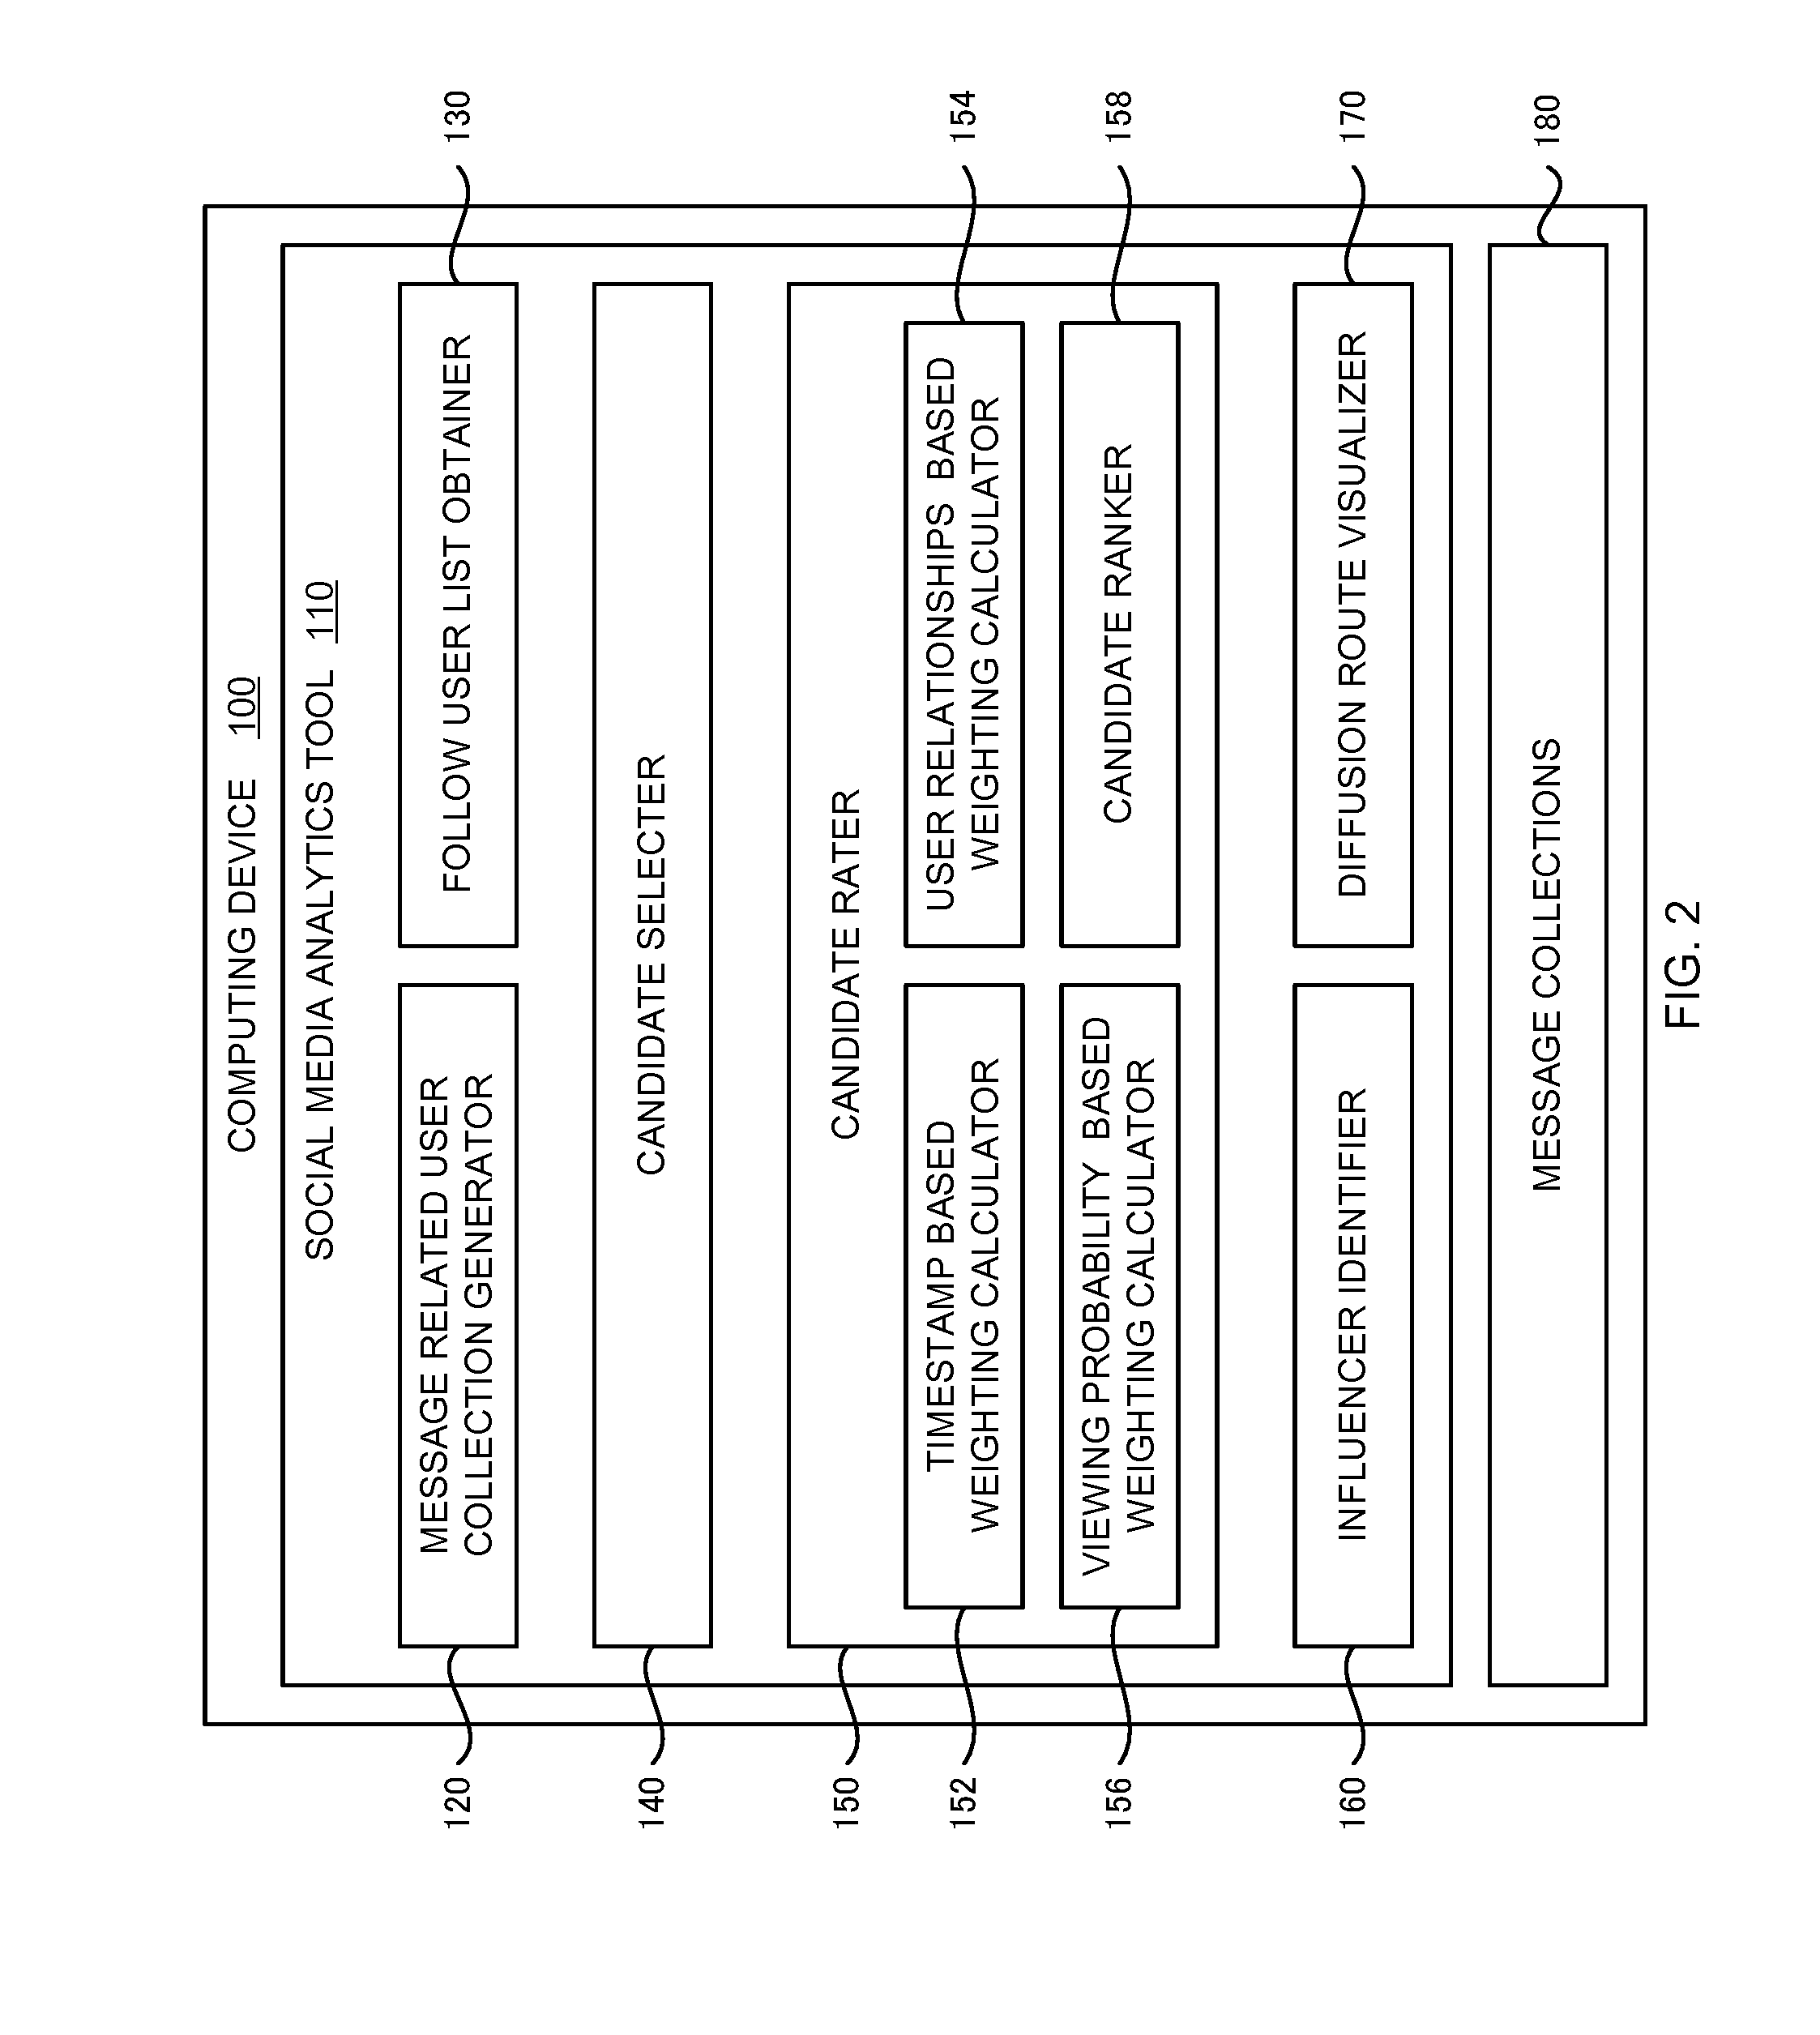 Estimation of information diffusion route on computer mediated communication network